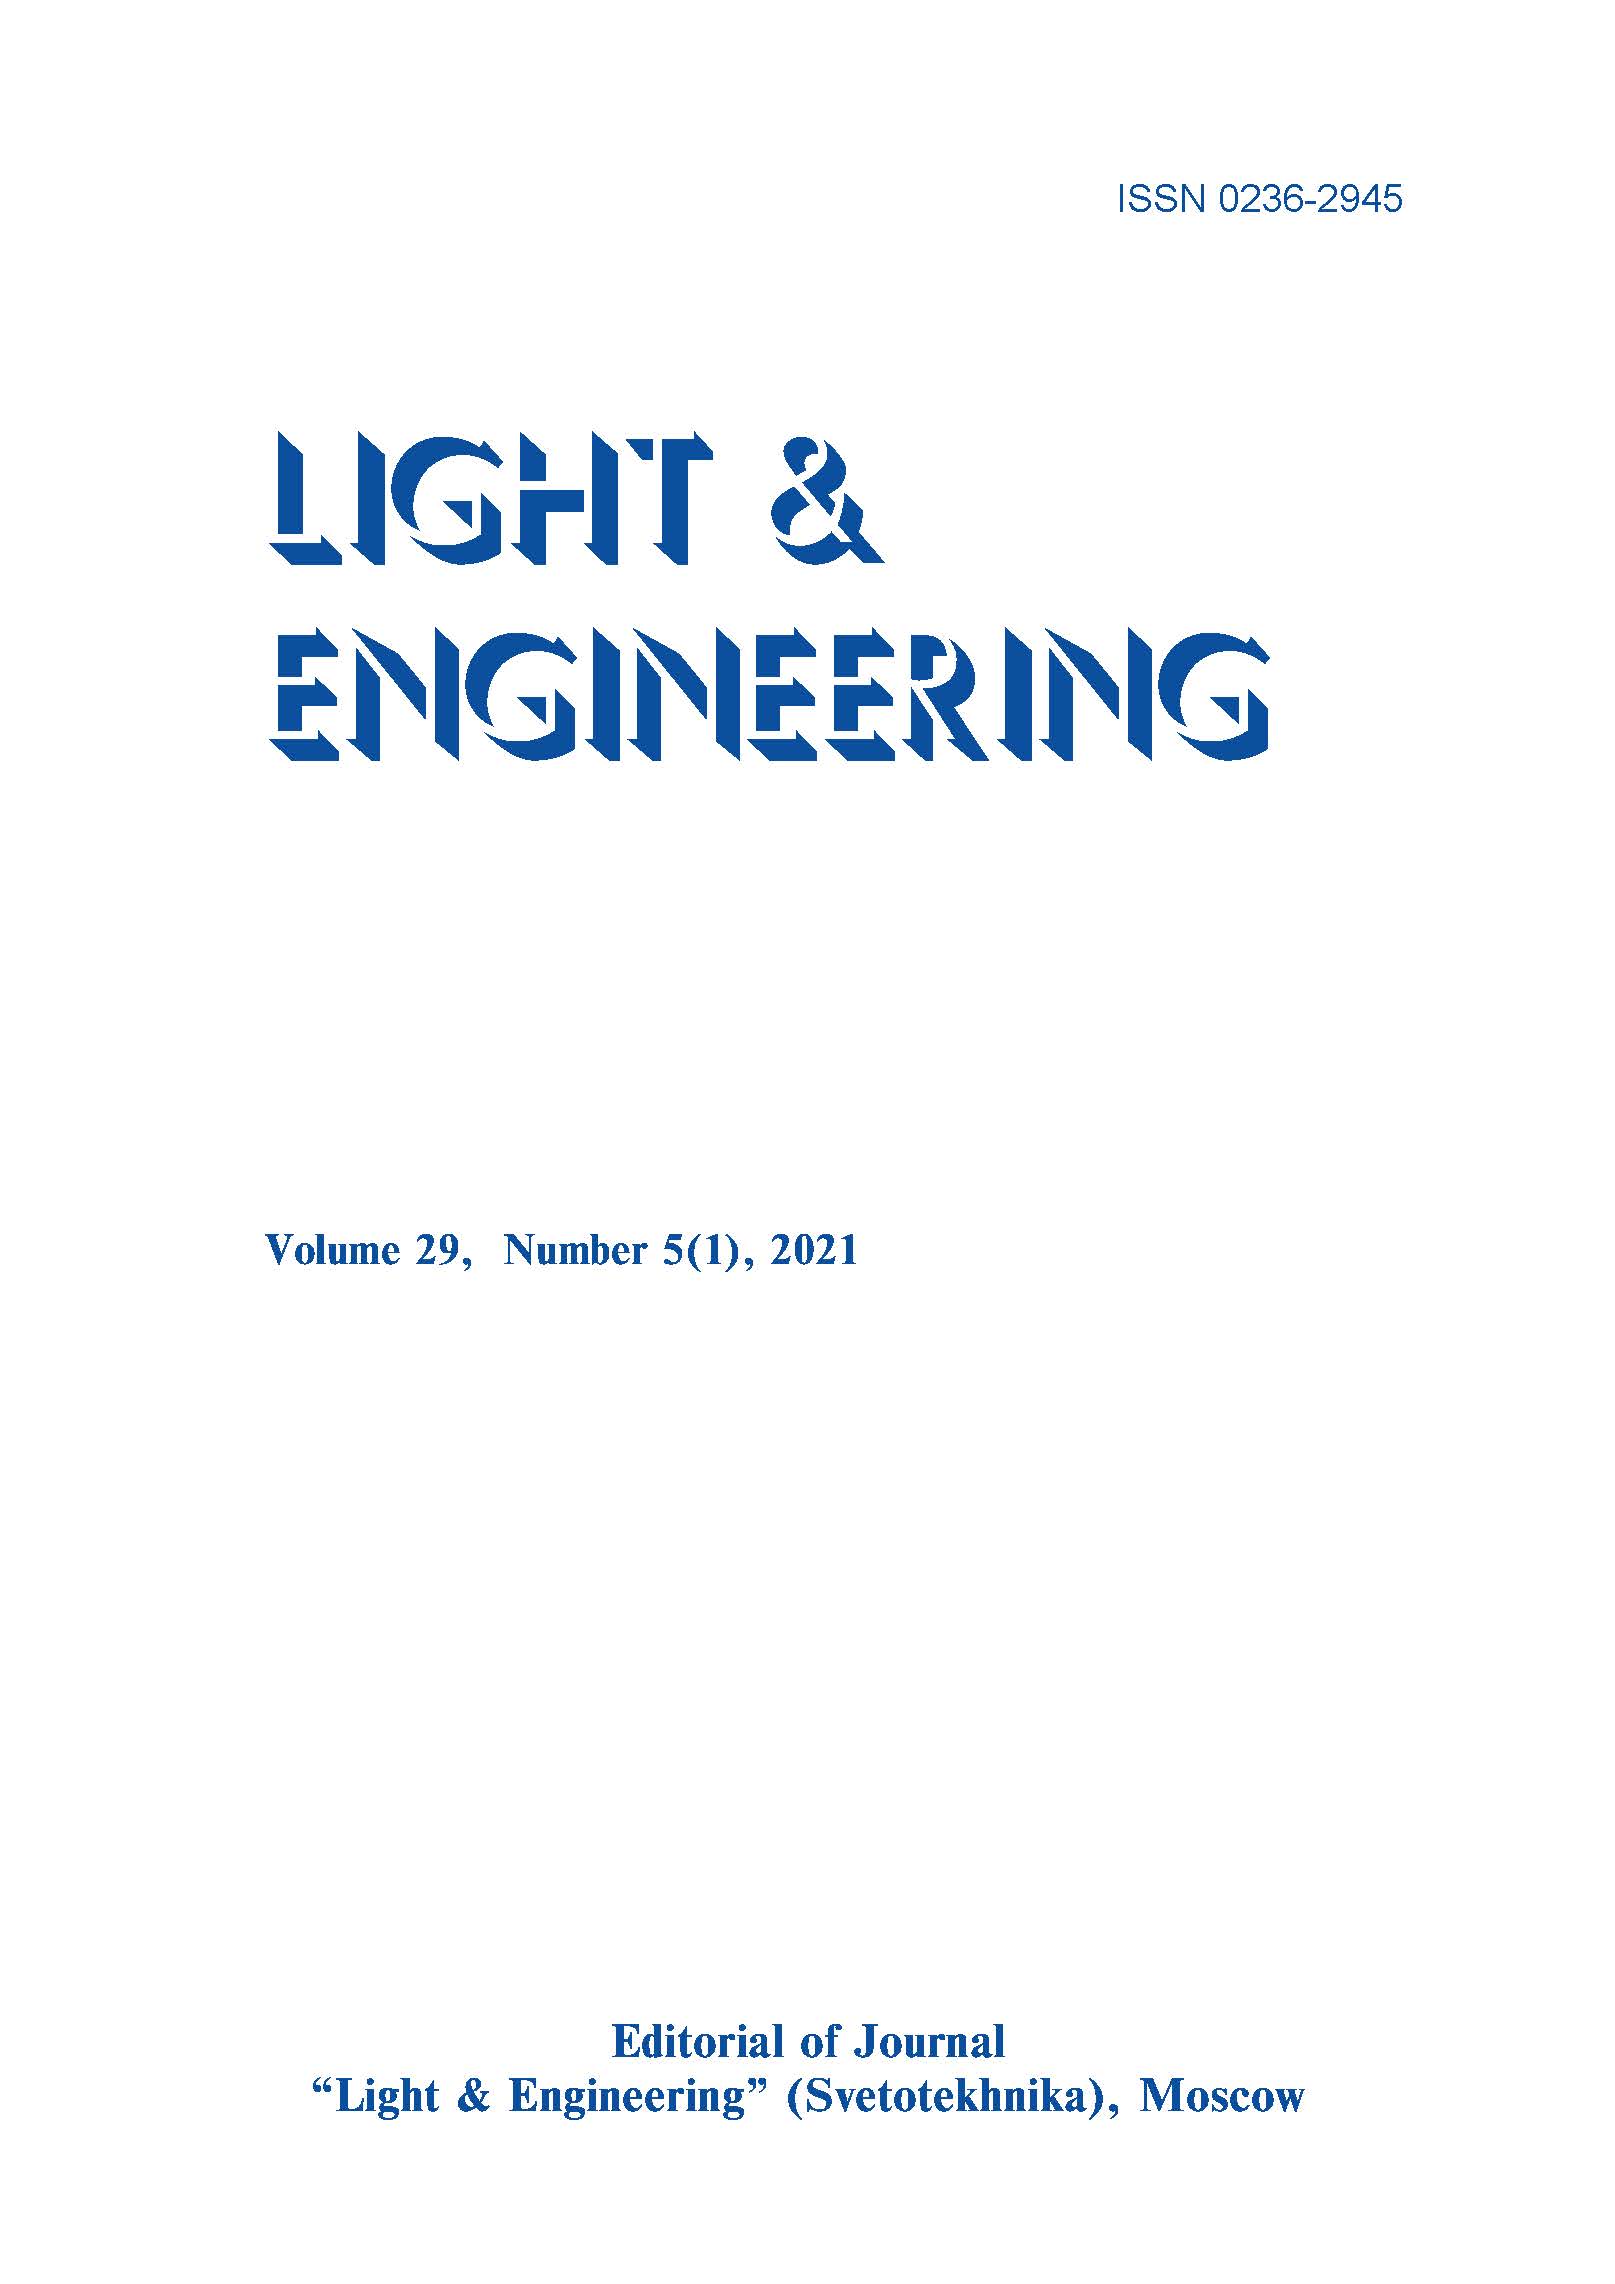 Luminaires and the History of the Development of Artificial Lighting in Russia L&E, Vol. 29, No. 5 (1), 2021